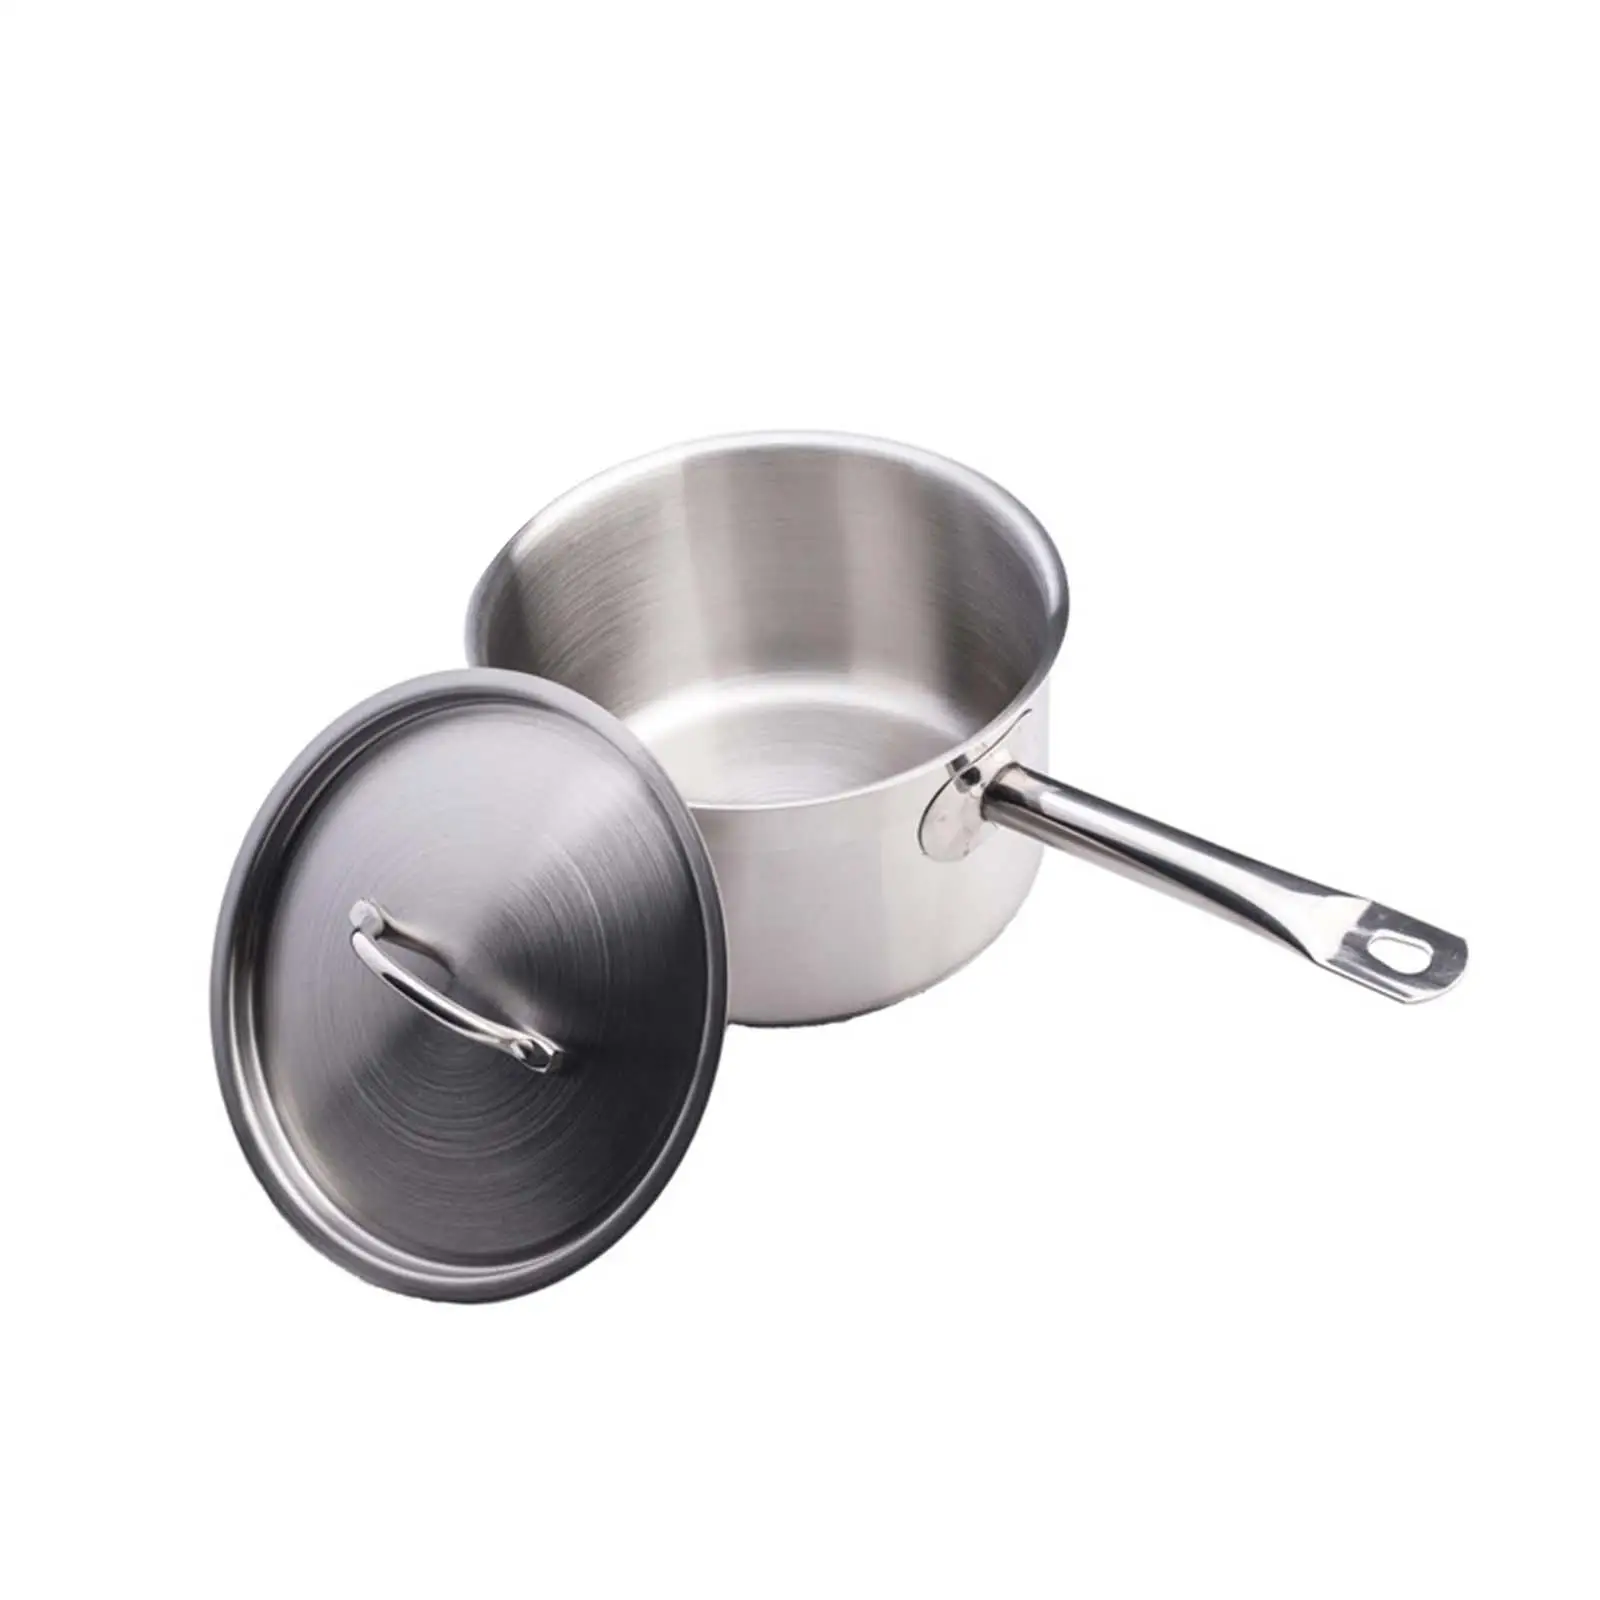 Small Pot Milk Soup Pan Professional 2.6L Stainless Steel Saucepan with Lid for Boiling Milk Restaurant Gravy Home Kitchen Sauce